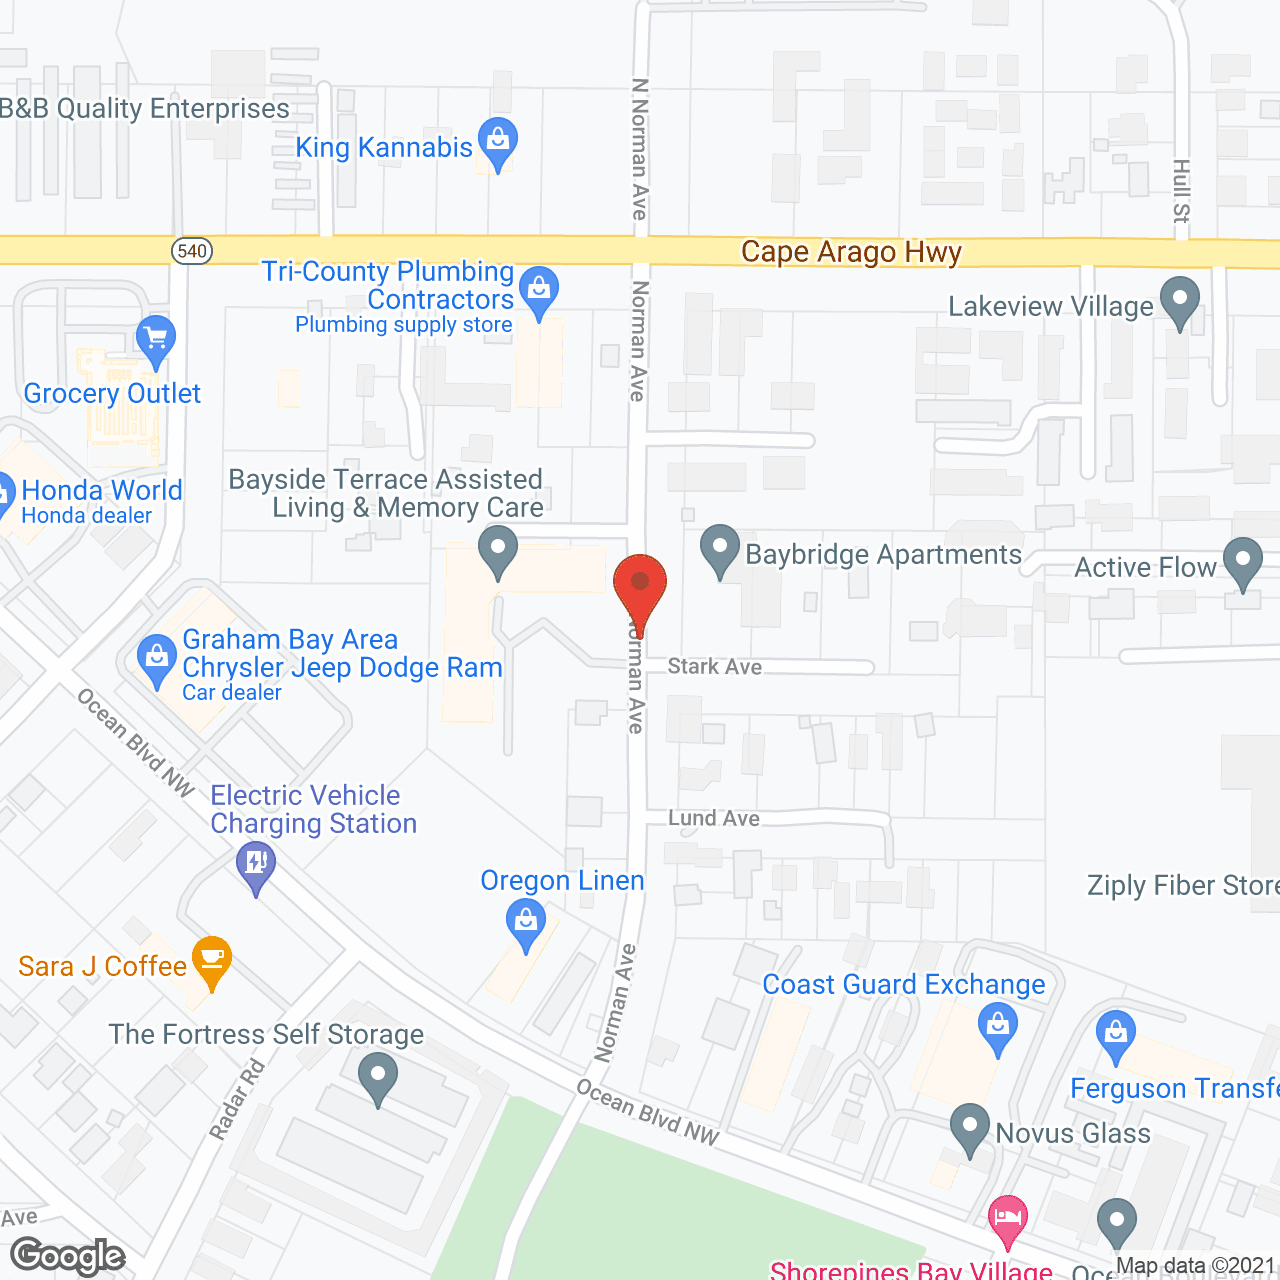 Bayside Terrace Assisted Living and Memory Care in google map